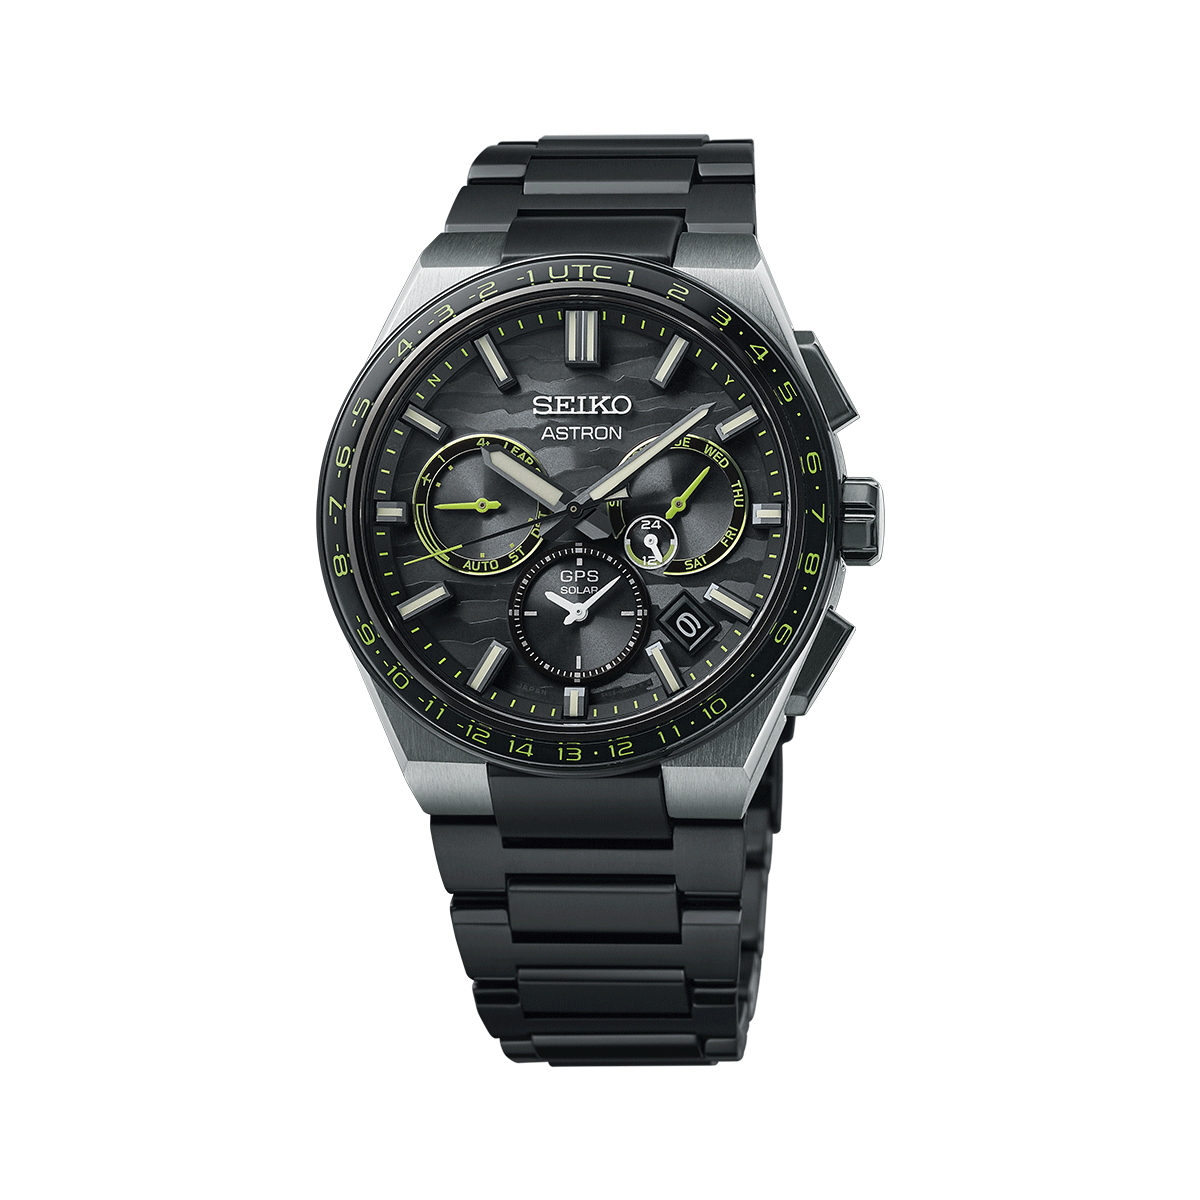 Seiko Astron Quartz Black Dial Men's Watch for Price on request for sale  from a Seller on Chrono24